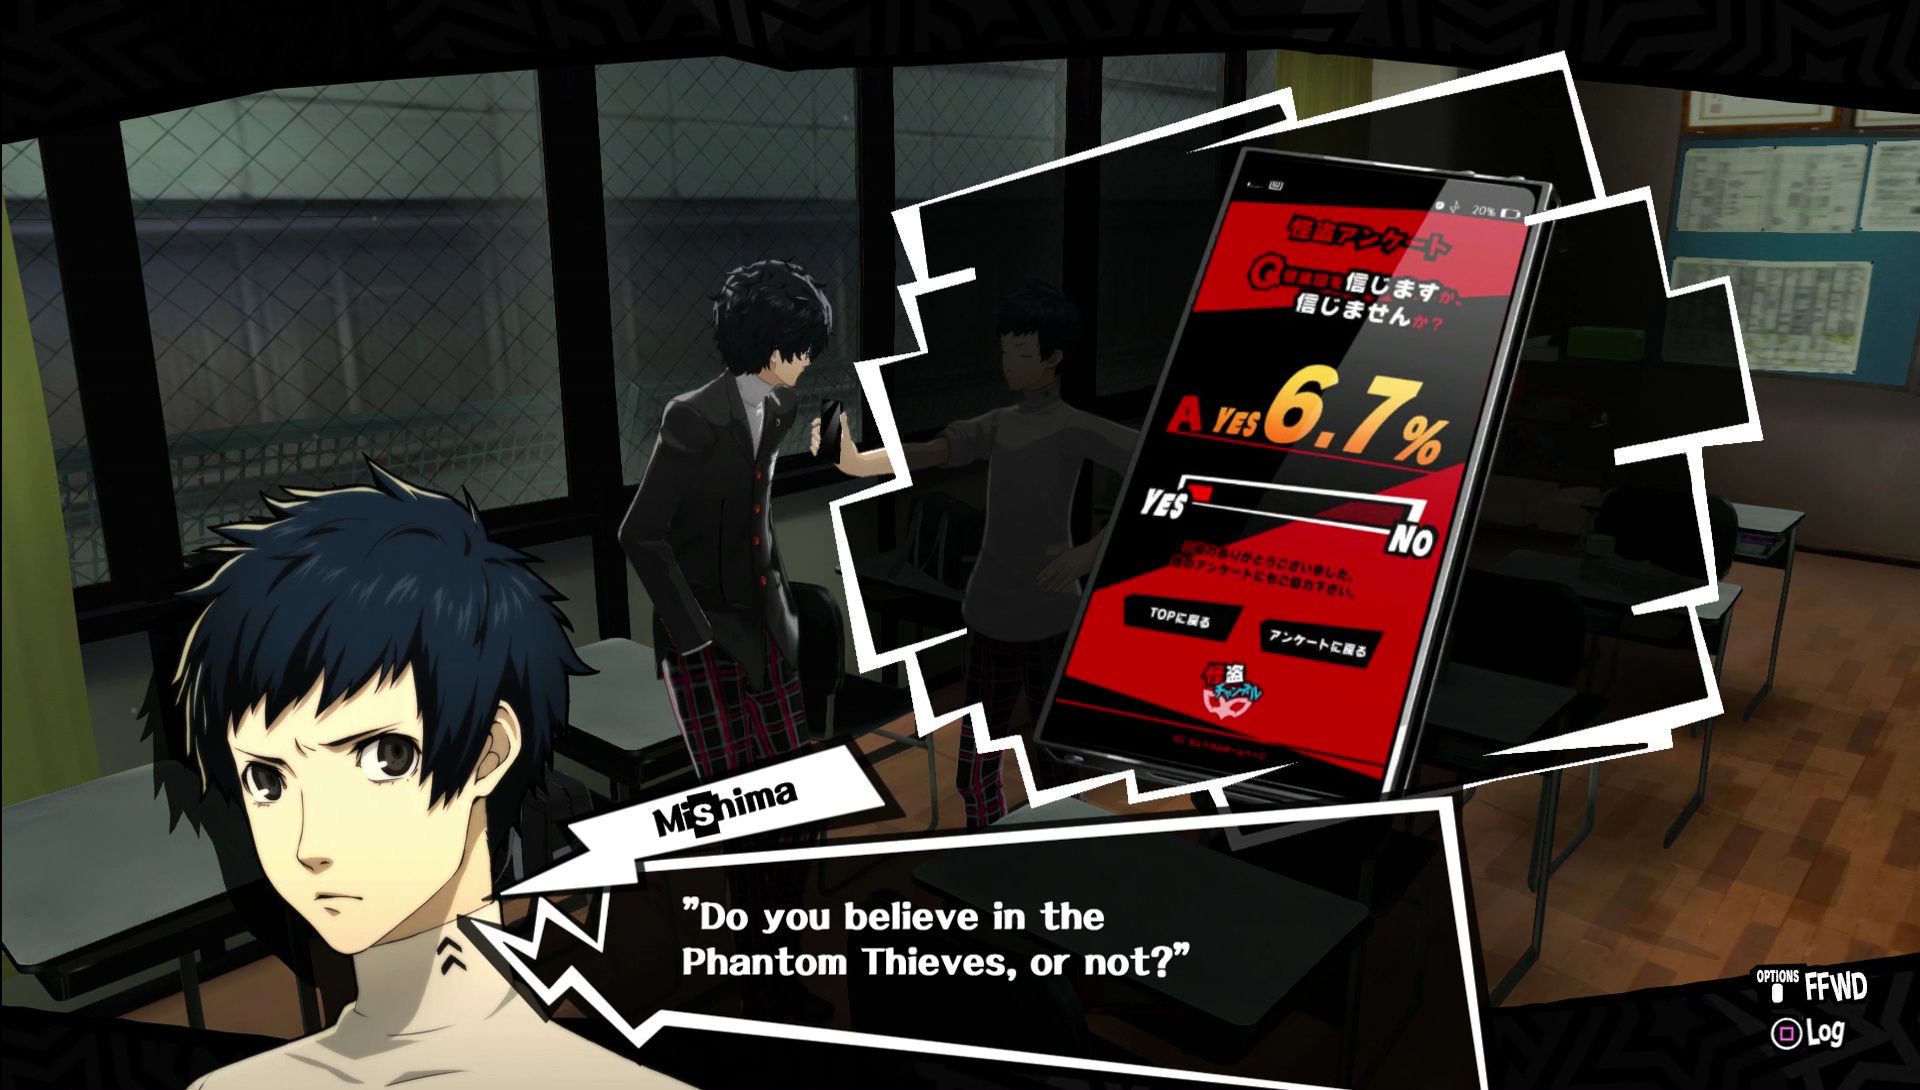 Persona 5 Royal Confidant Makoto Guide: Priestess updated dialogue, romance  choices - Daily Star